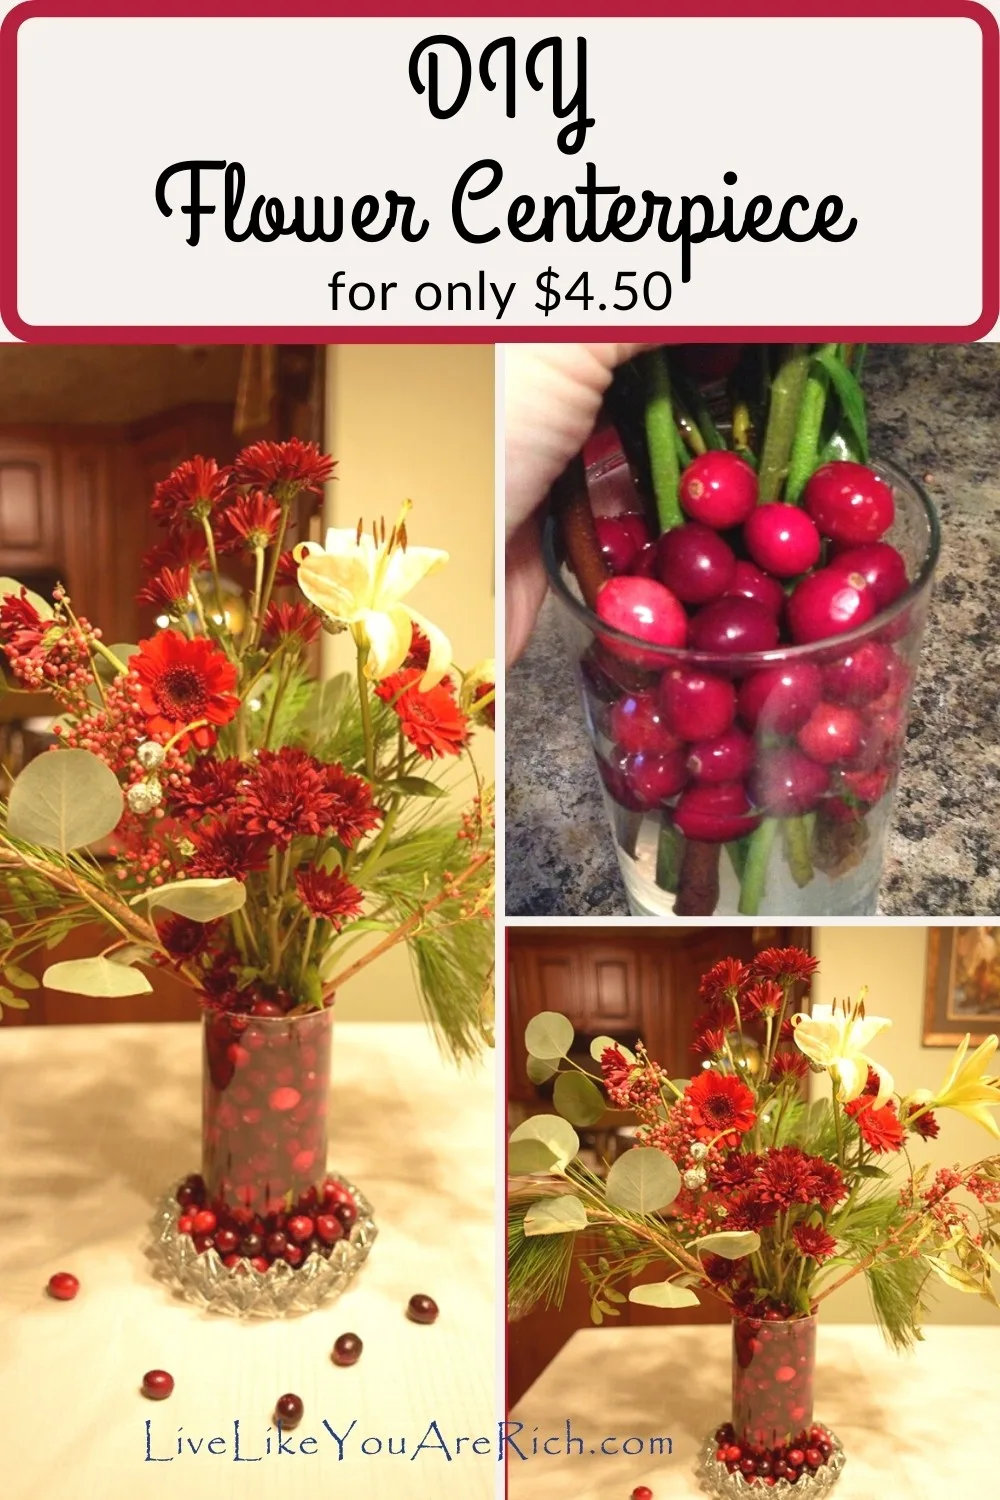 D.I.Y. $4.50 Centerpiece. Impress guests with fresh flowers, cranberries and more this winter without spending over $5.00